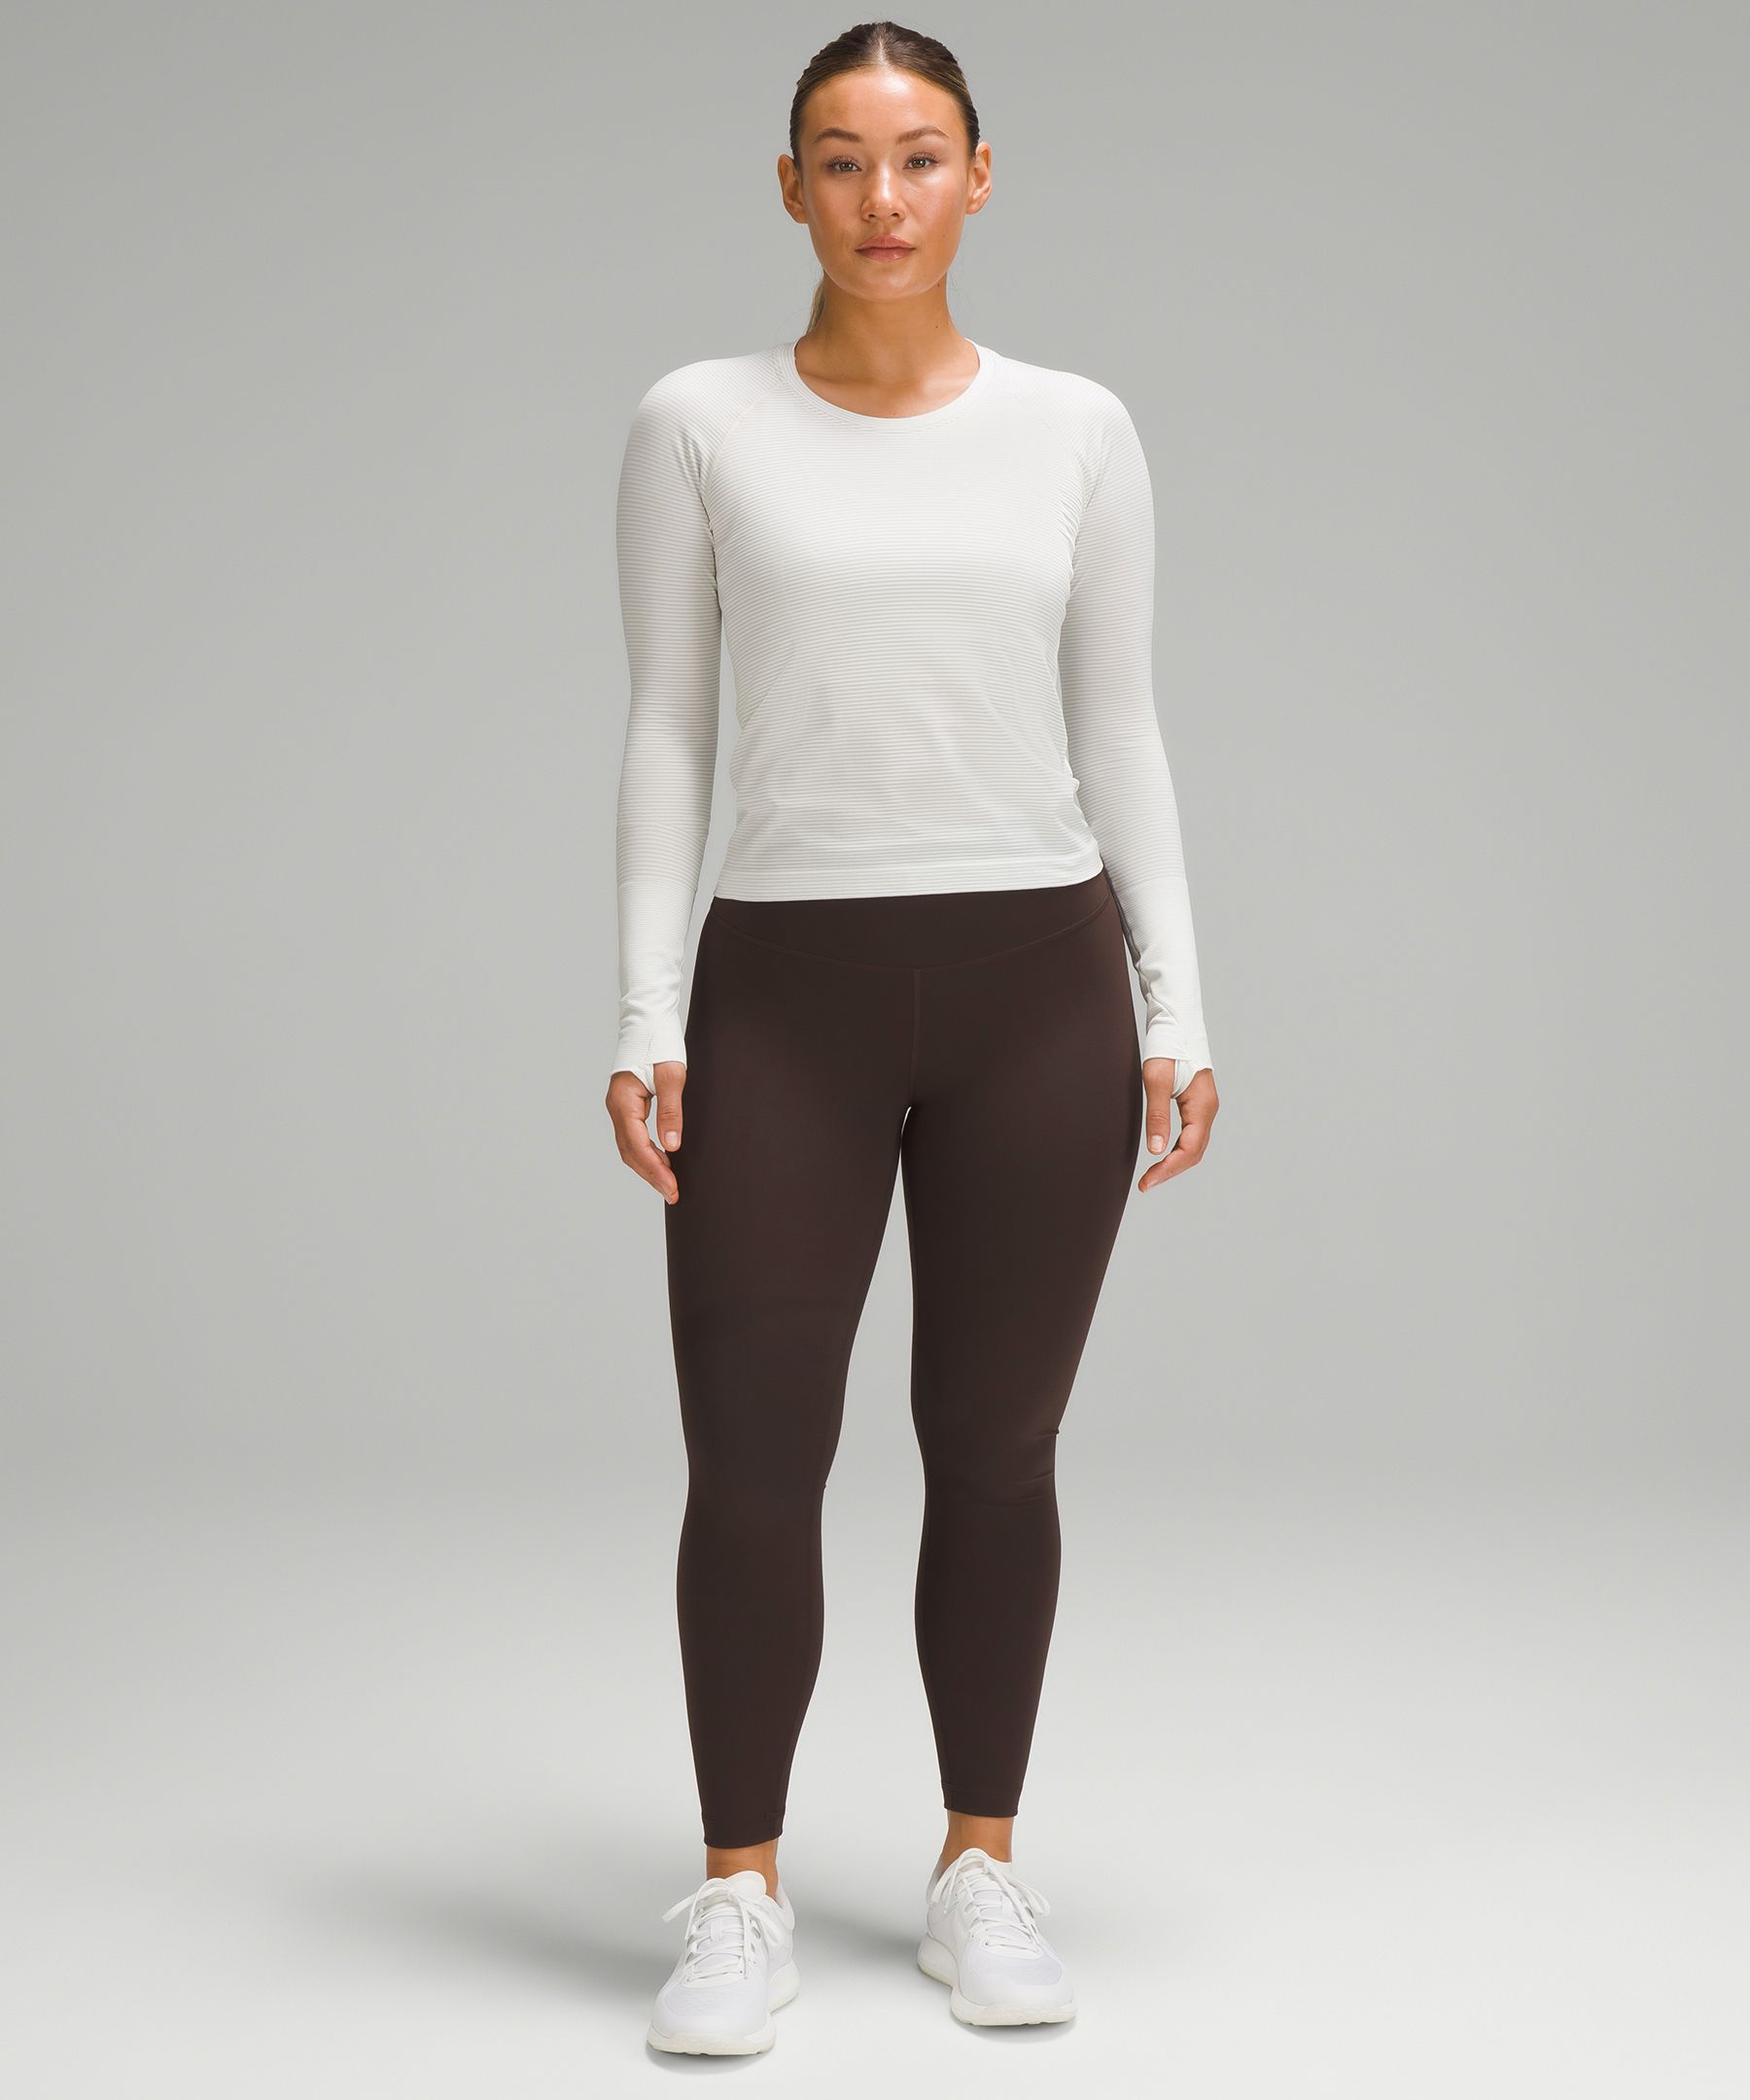 Lululemen Quick Dry Yoga Pants Workout Outfit With Drawstring Pockets And  Elastic Waist For Women And Men Perfect For Jogging, Sports, And Casual  Wear From Miki886, $27.42